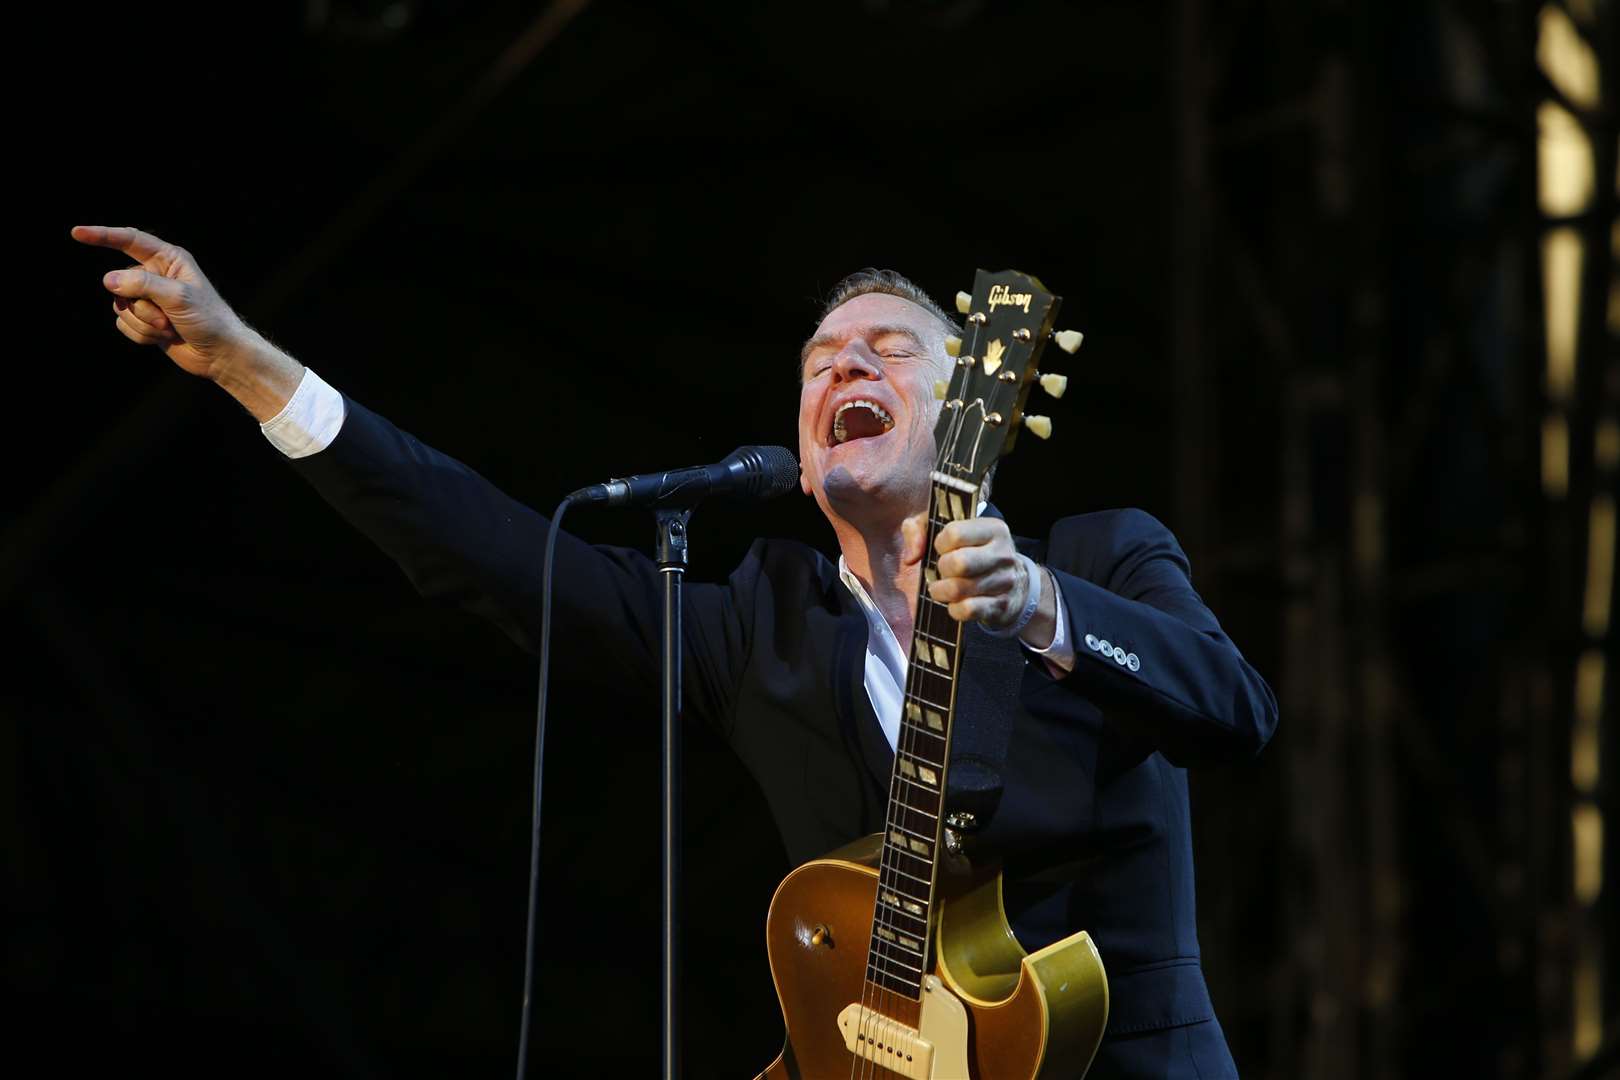 Bryan Adams playing at Kent County Cricket Club's ground in 2016